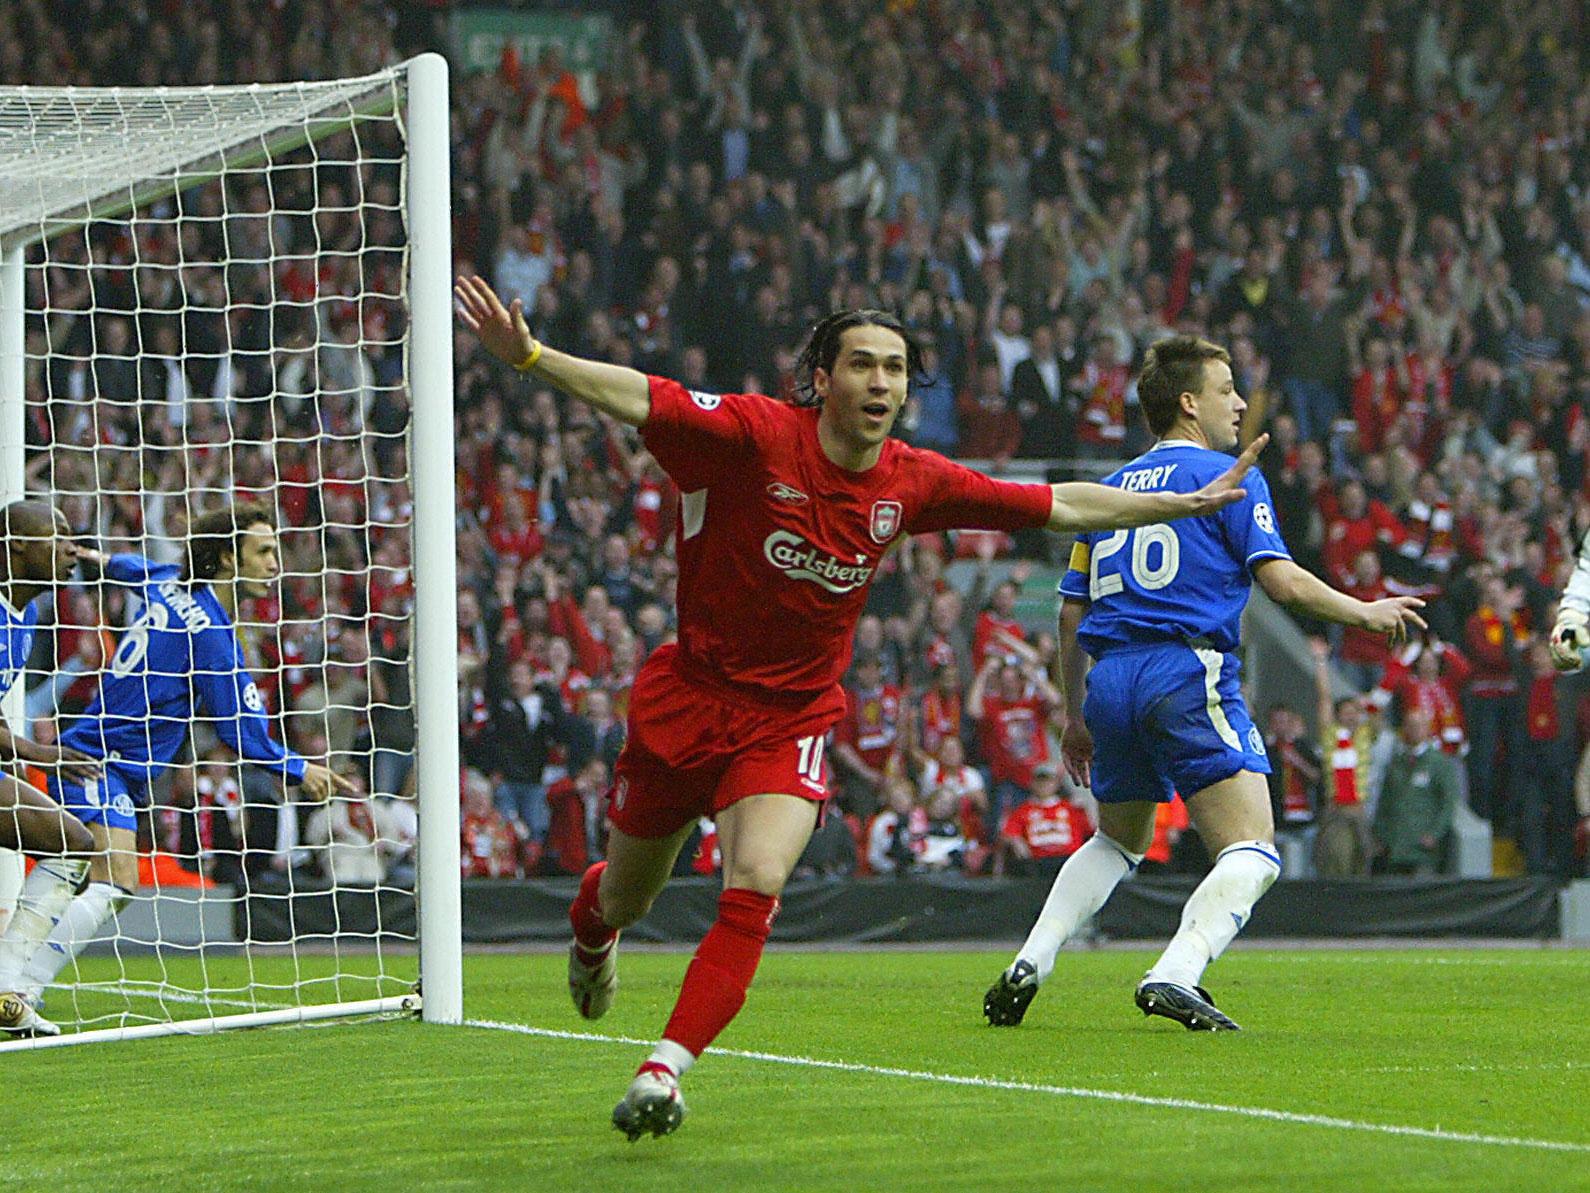 Liverpool beat Chelsea in the 2004-05 Champions League